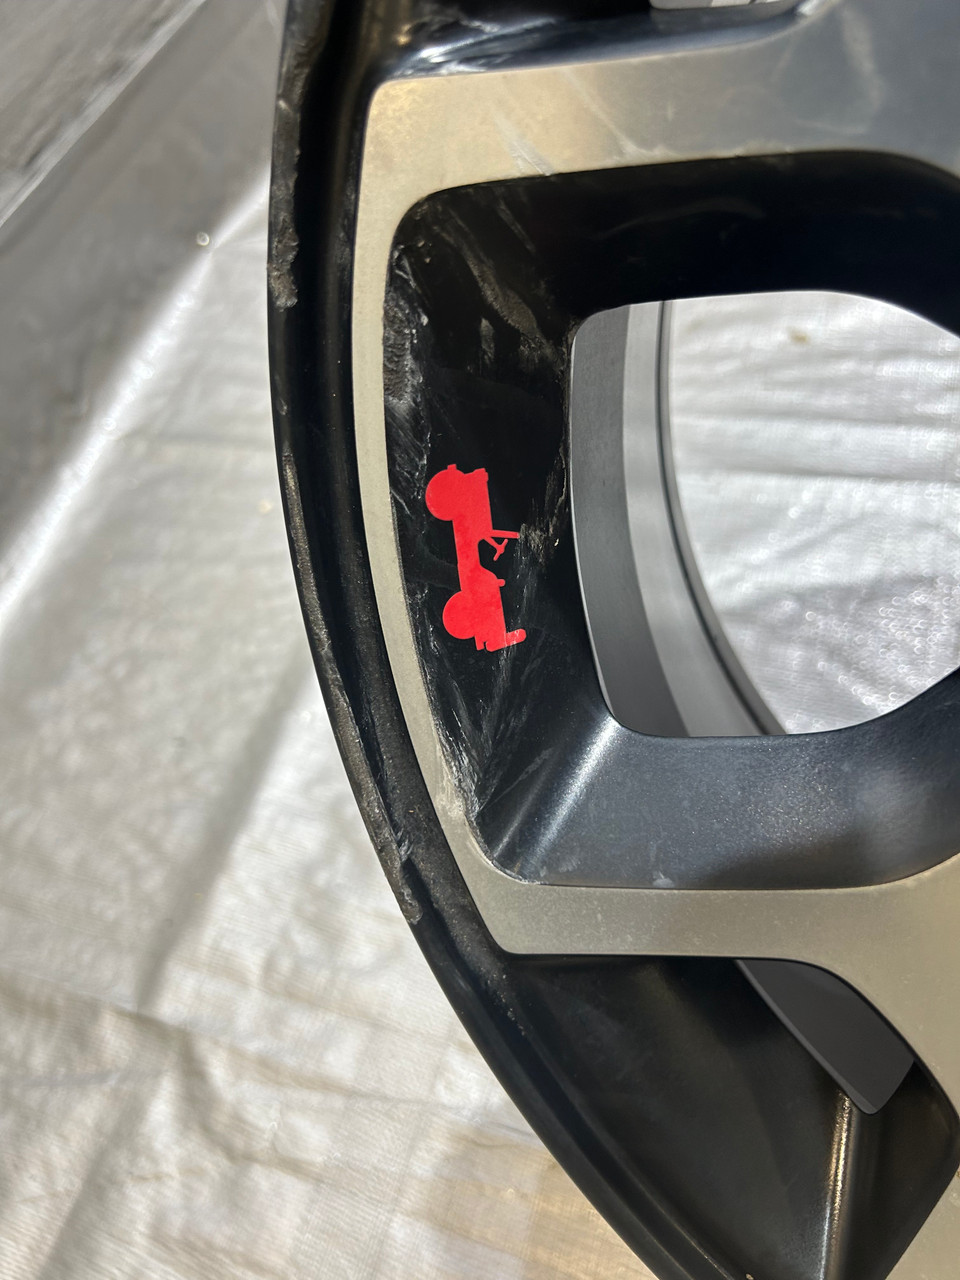 Aluminum Wheels - How to polish, what to use? -  - The top  destination for Jeep JK and JL Wrangler news, rumors, and discussion